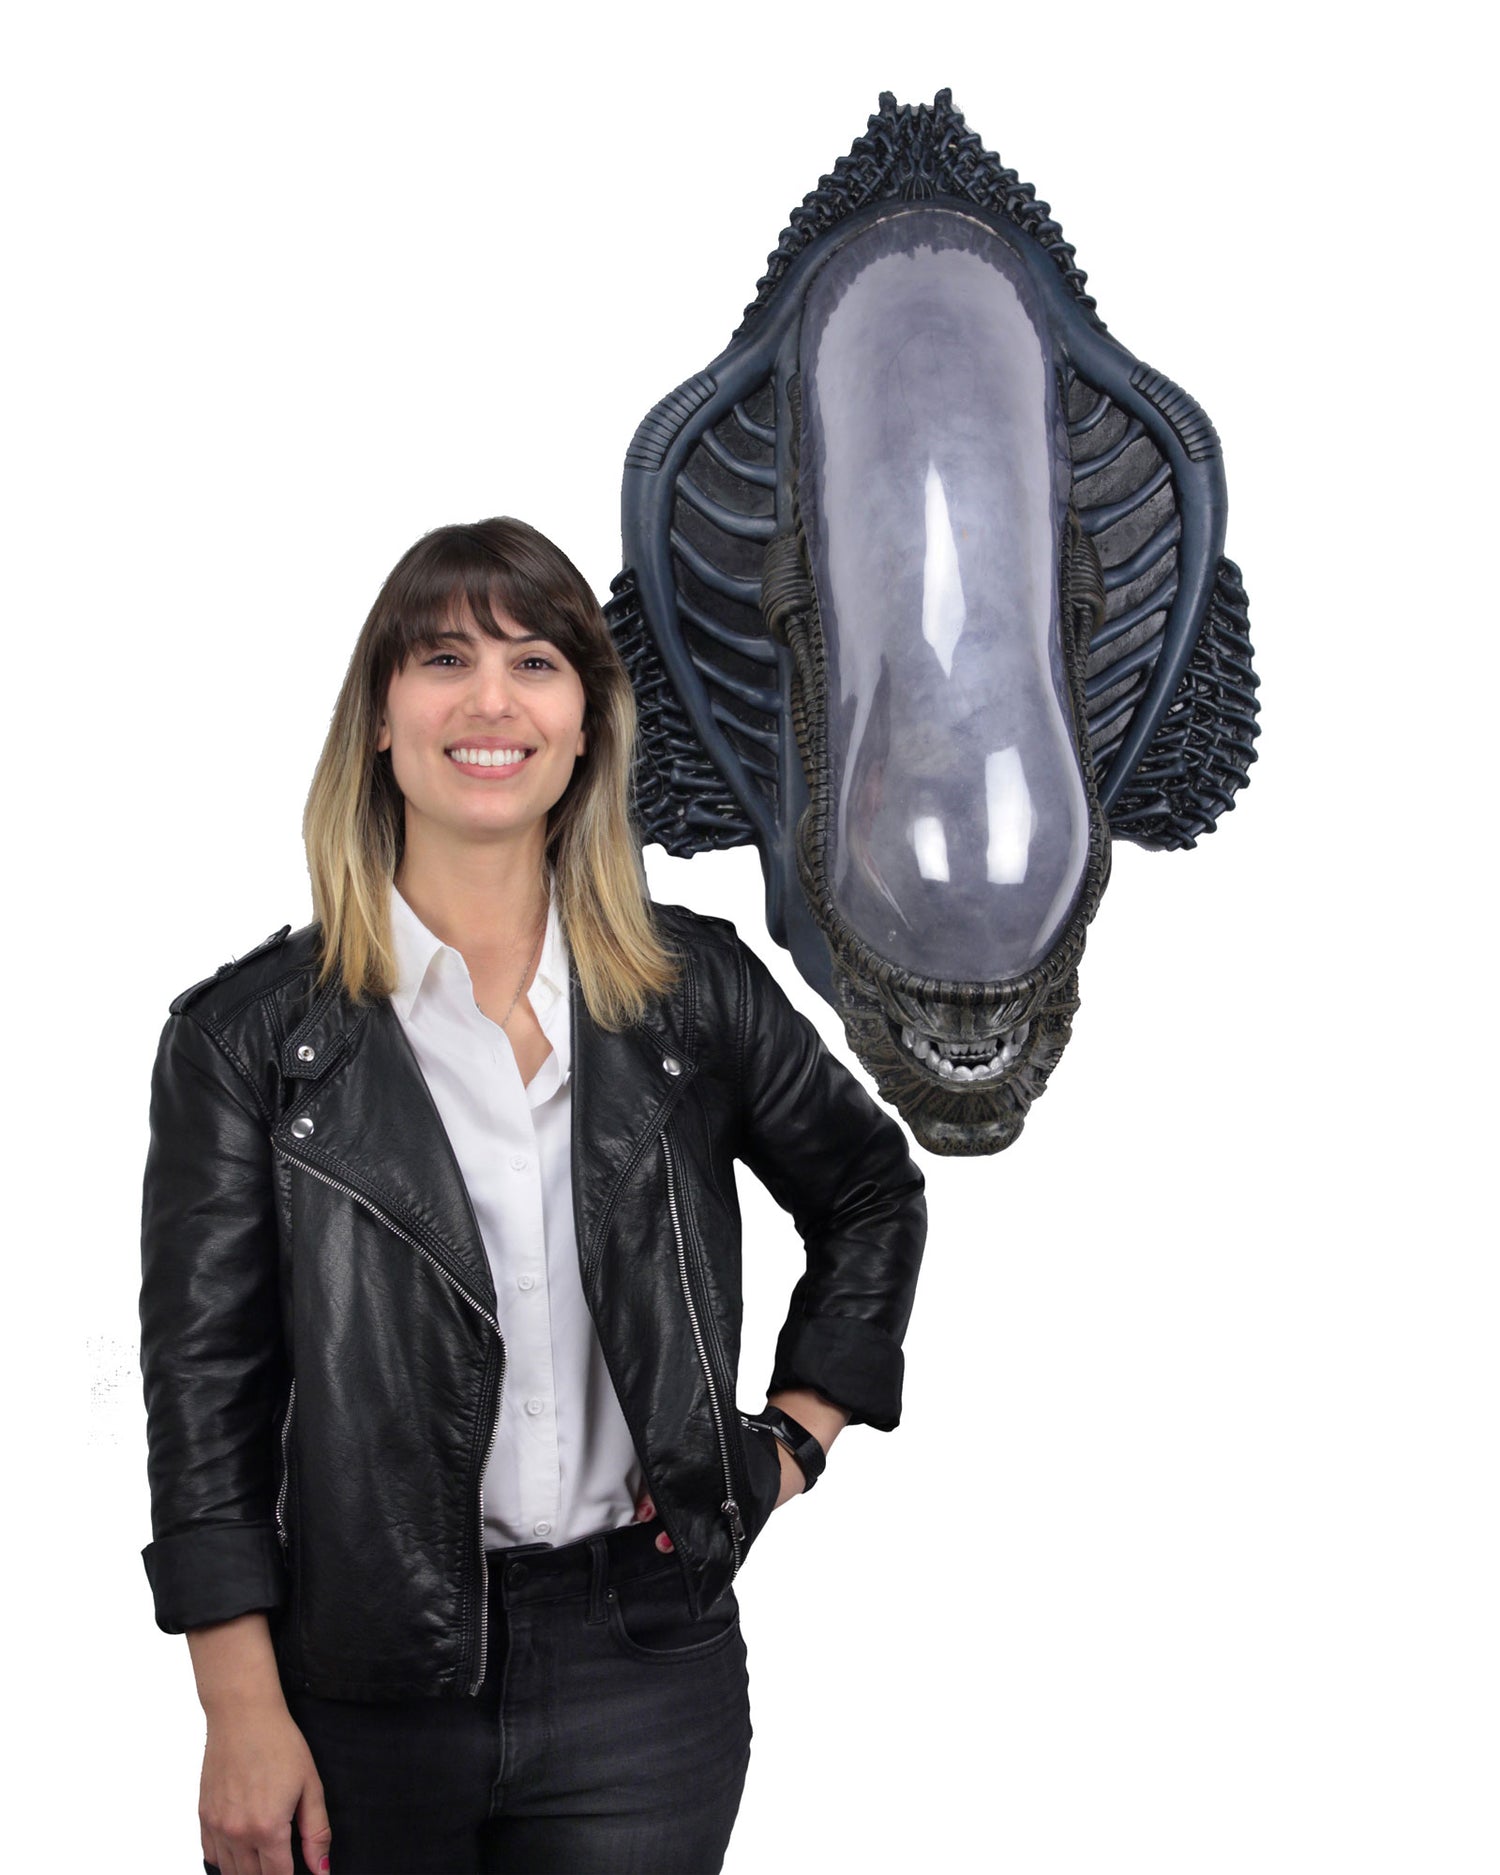 Alien Xenomorph Trophy Plaque with woman standing next to it 